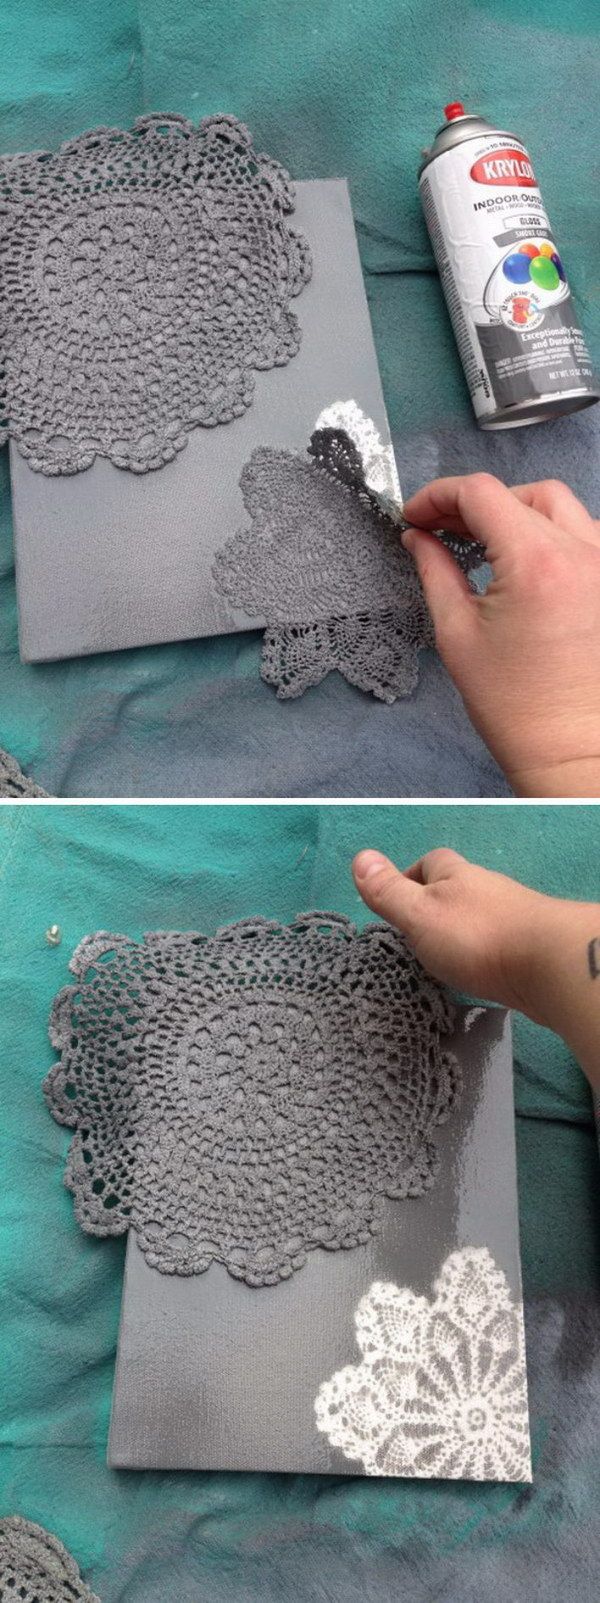 DIY SPRAY PAINTED DOILY CANVAS -   Ideas for Photo Transfer Projects